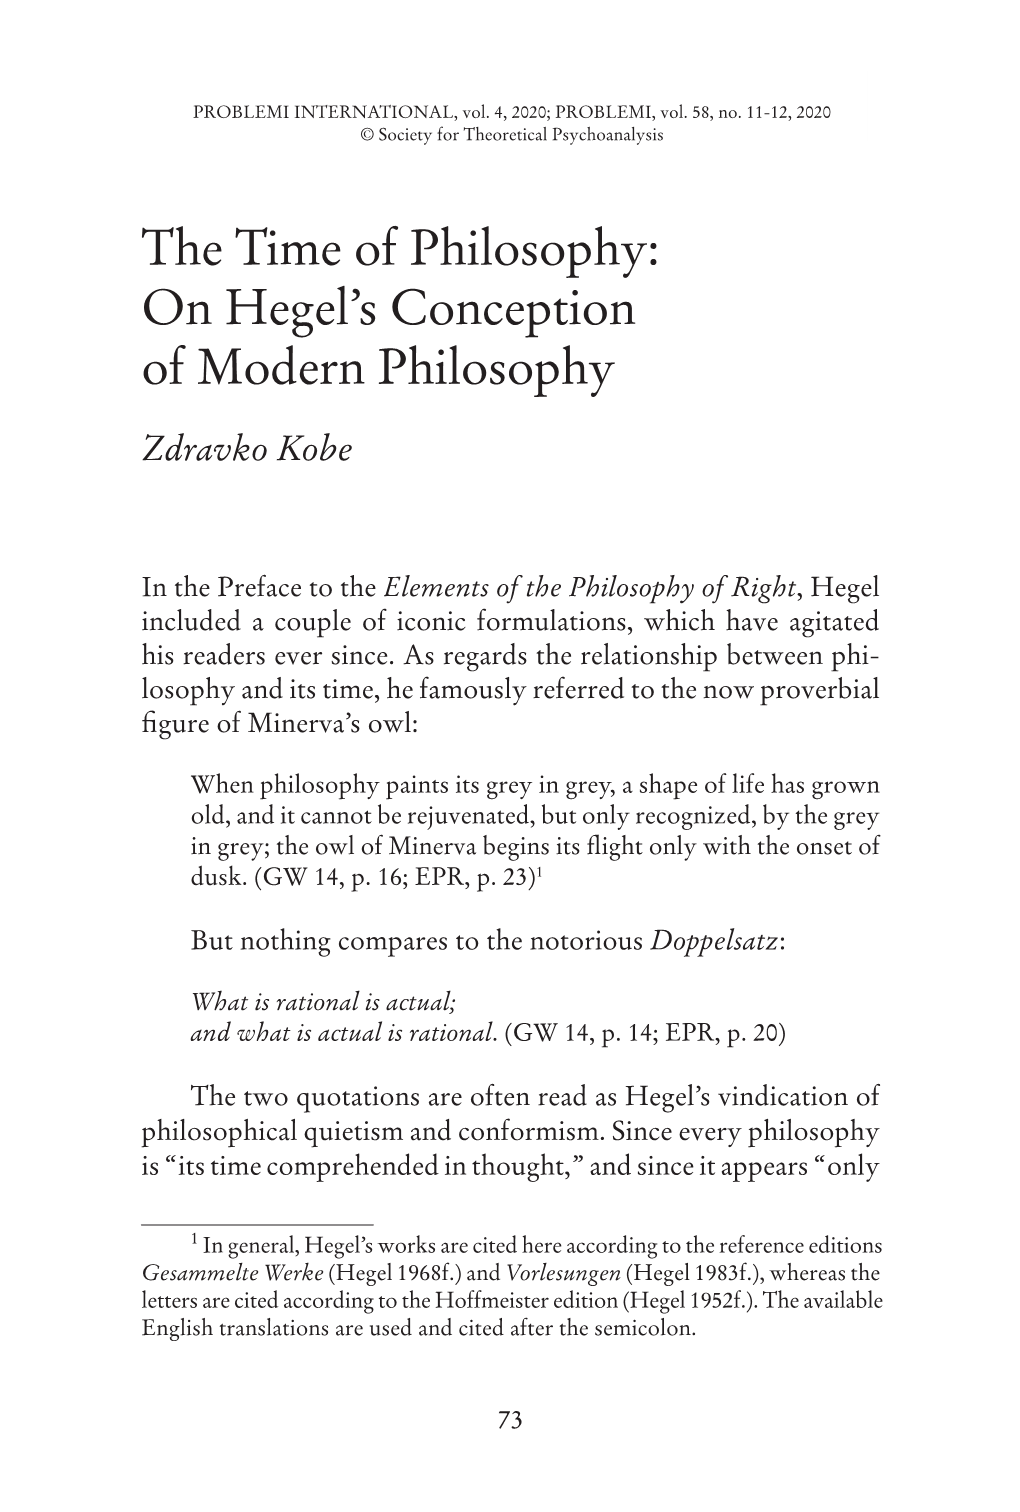 On Hegel's Conception of Modern Philosophy